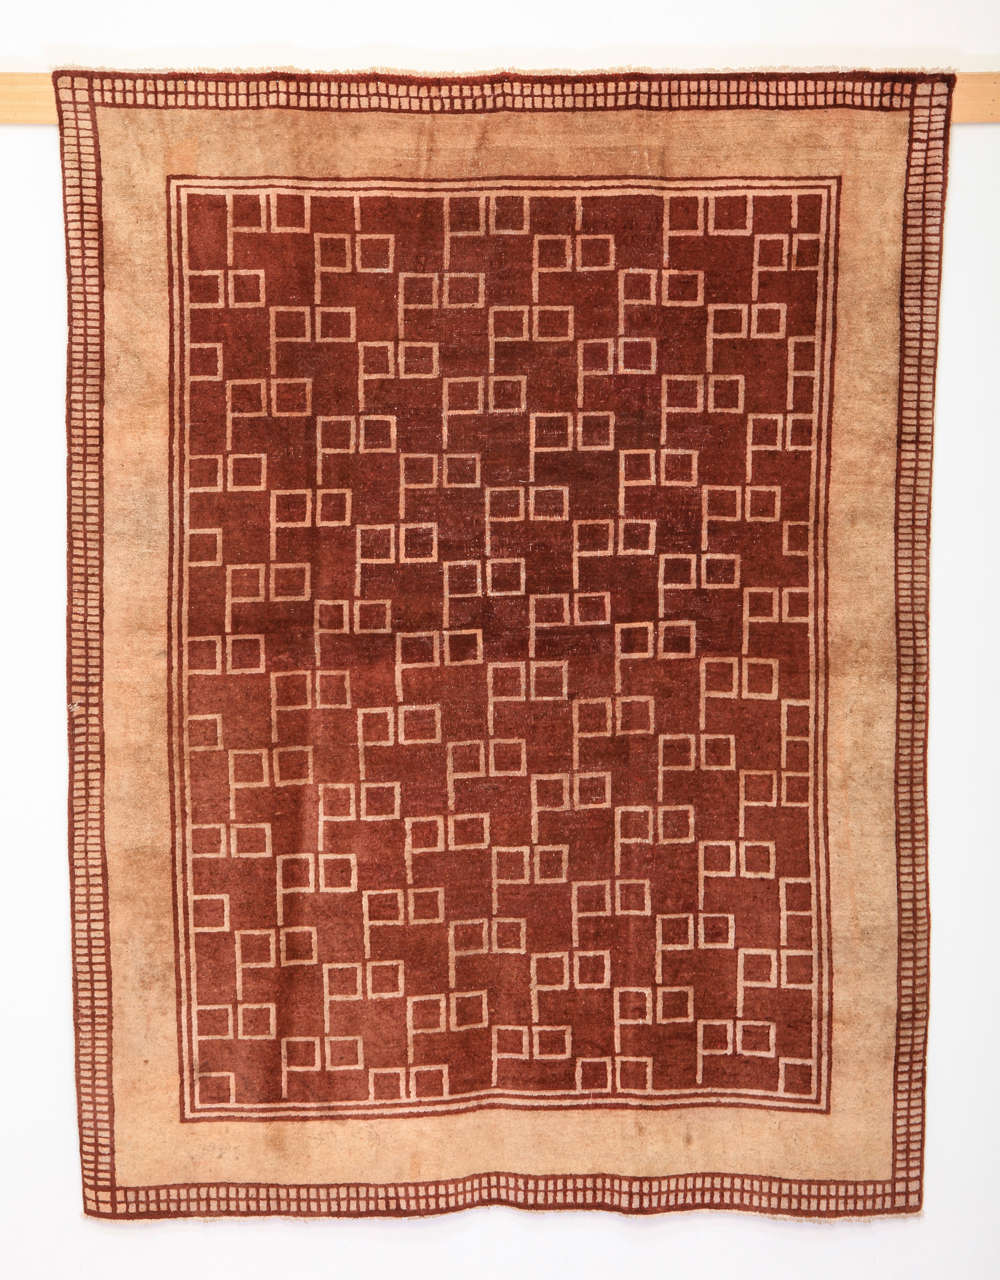 A rare and unusual carpet woven in two colors with an all-over pattern of square devices. Although it was originally sourced in China, carpets of this type were influenced by the European design movements of the 20th century.